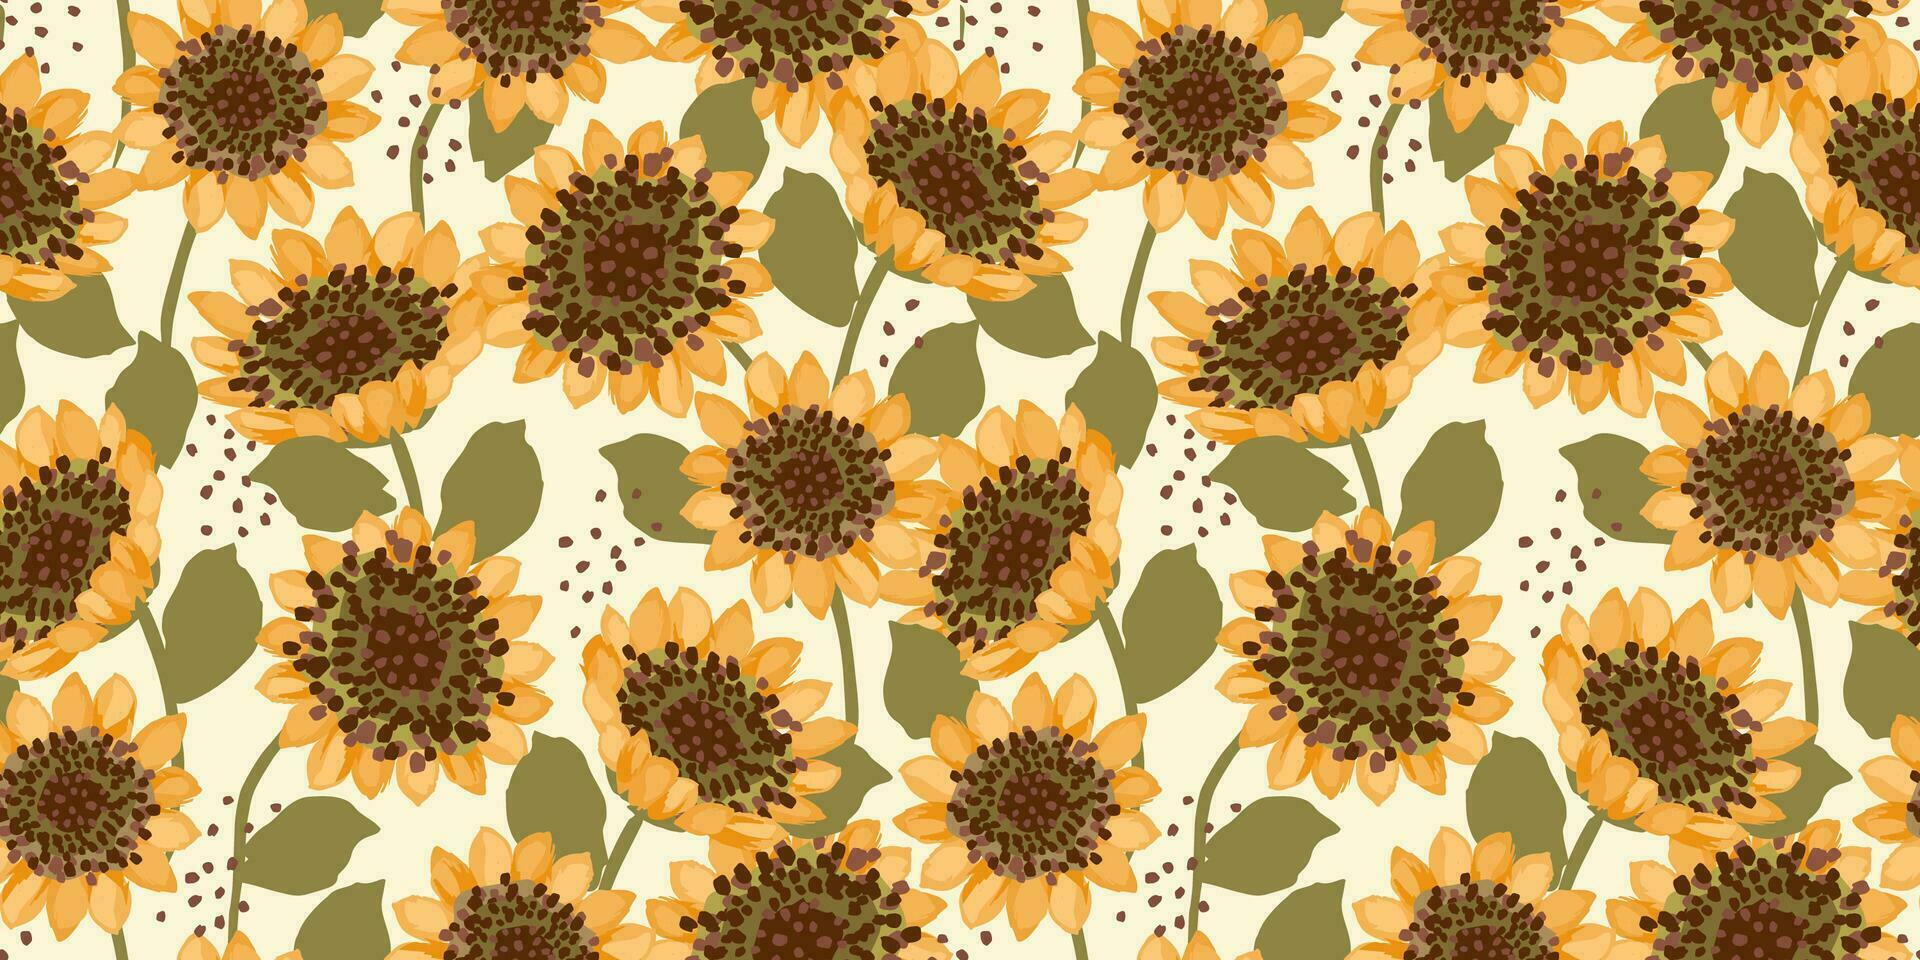 Autumn seamless pattern with  sunflowers. Vector background for various surface. Hand drawn textures.